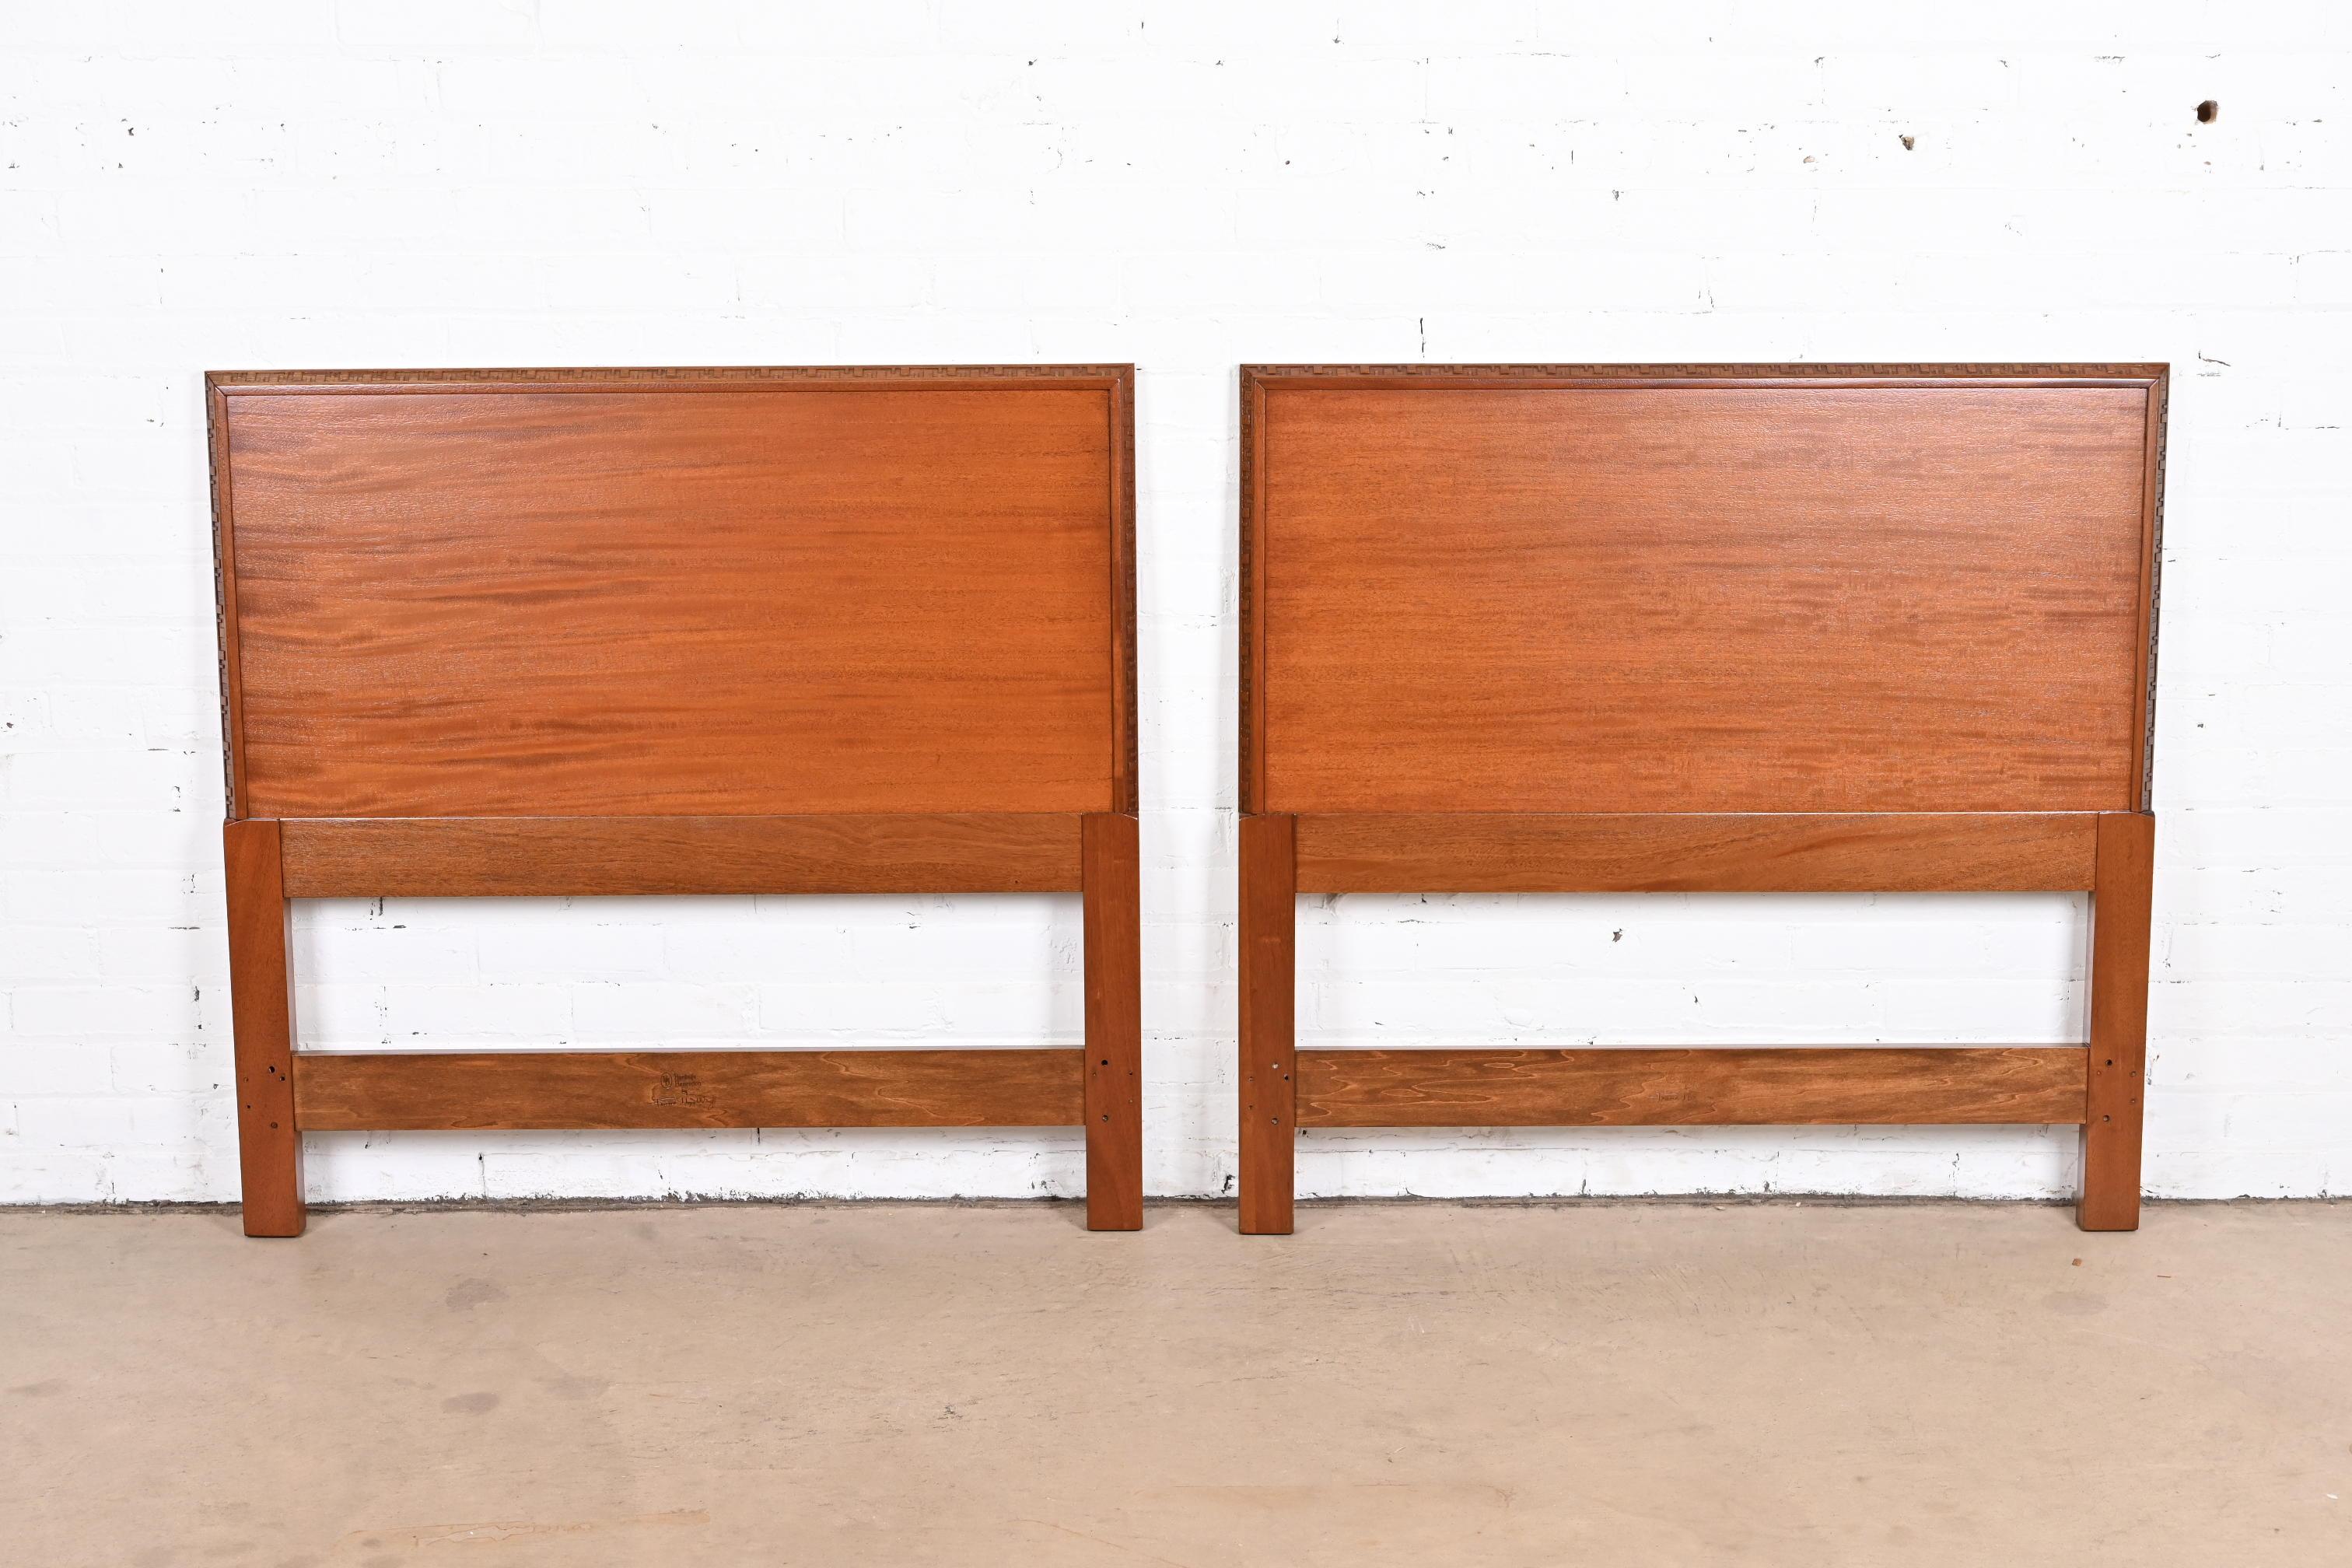 A rare and exceptional pair of Mid-Century Modern 